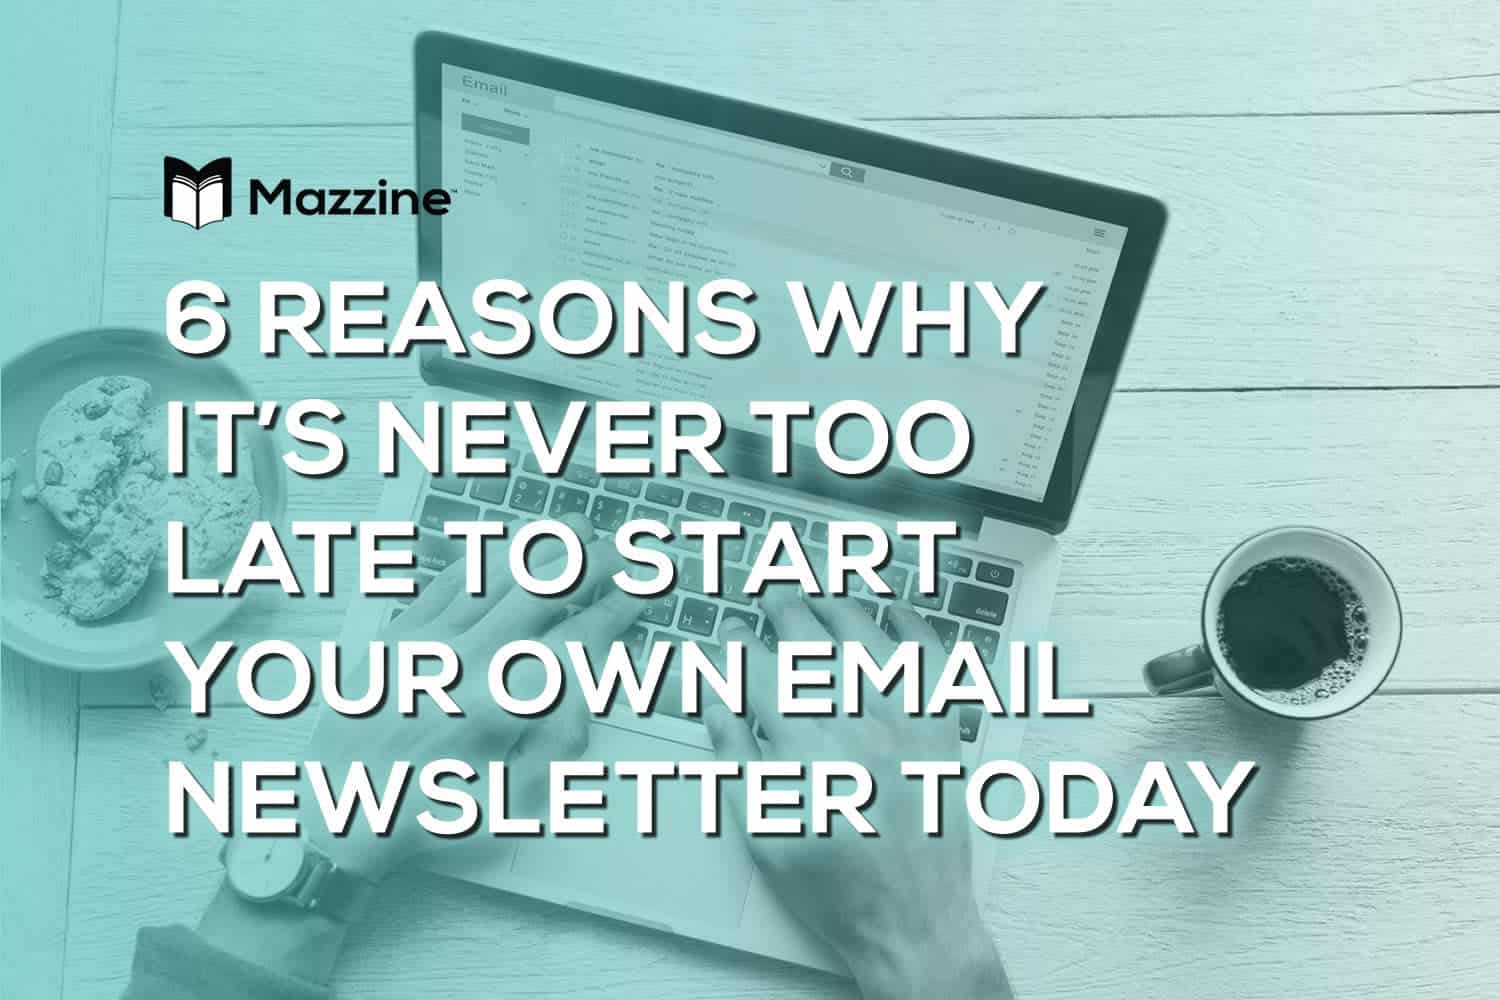 6 Reasons Why it’s Never Too Late to Start Your Own Email Newsletter Today